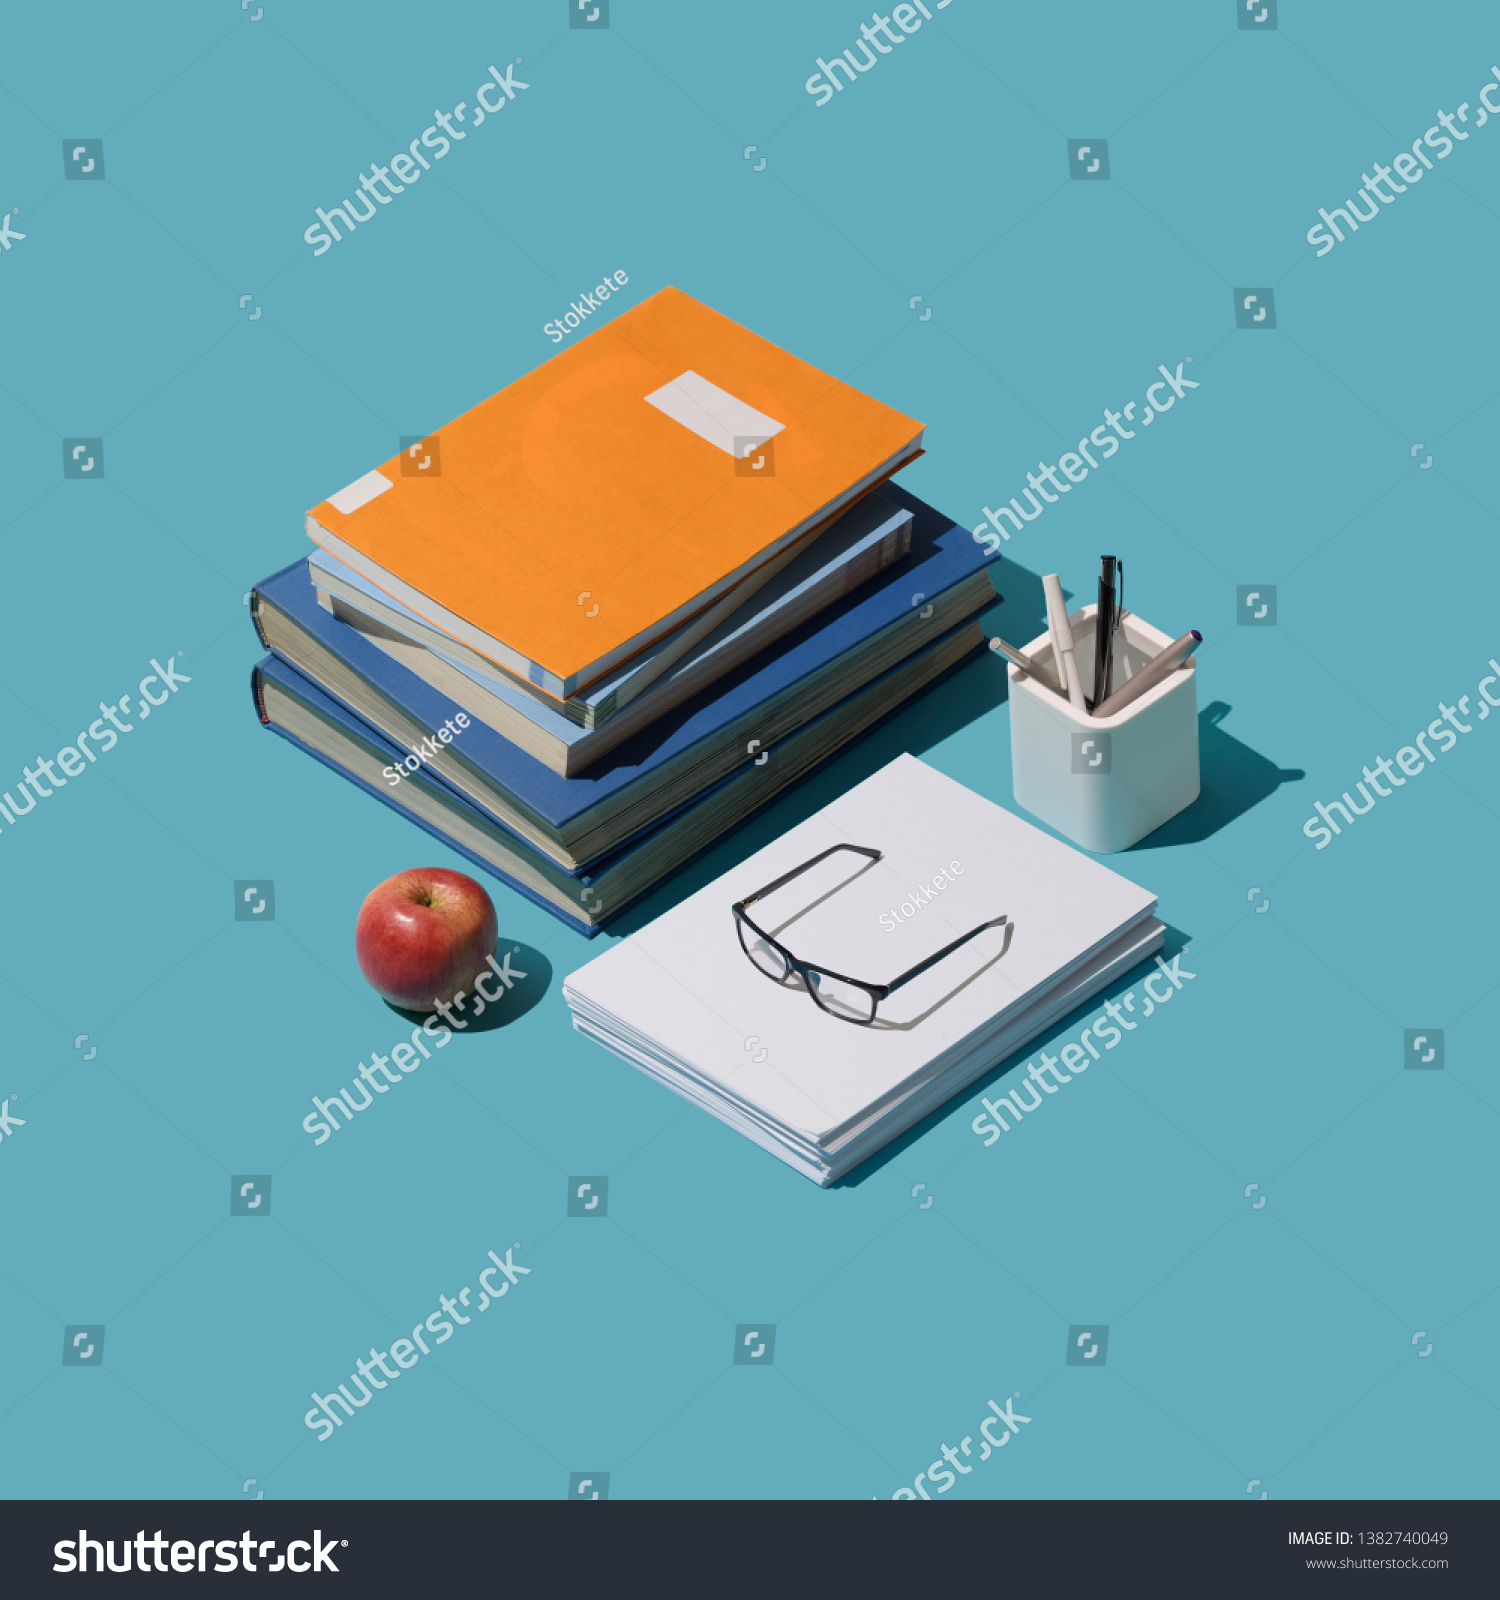 Back to school isometric student desktop with books and stationery, learning and education concept #1382740049